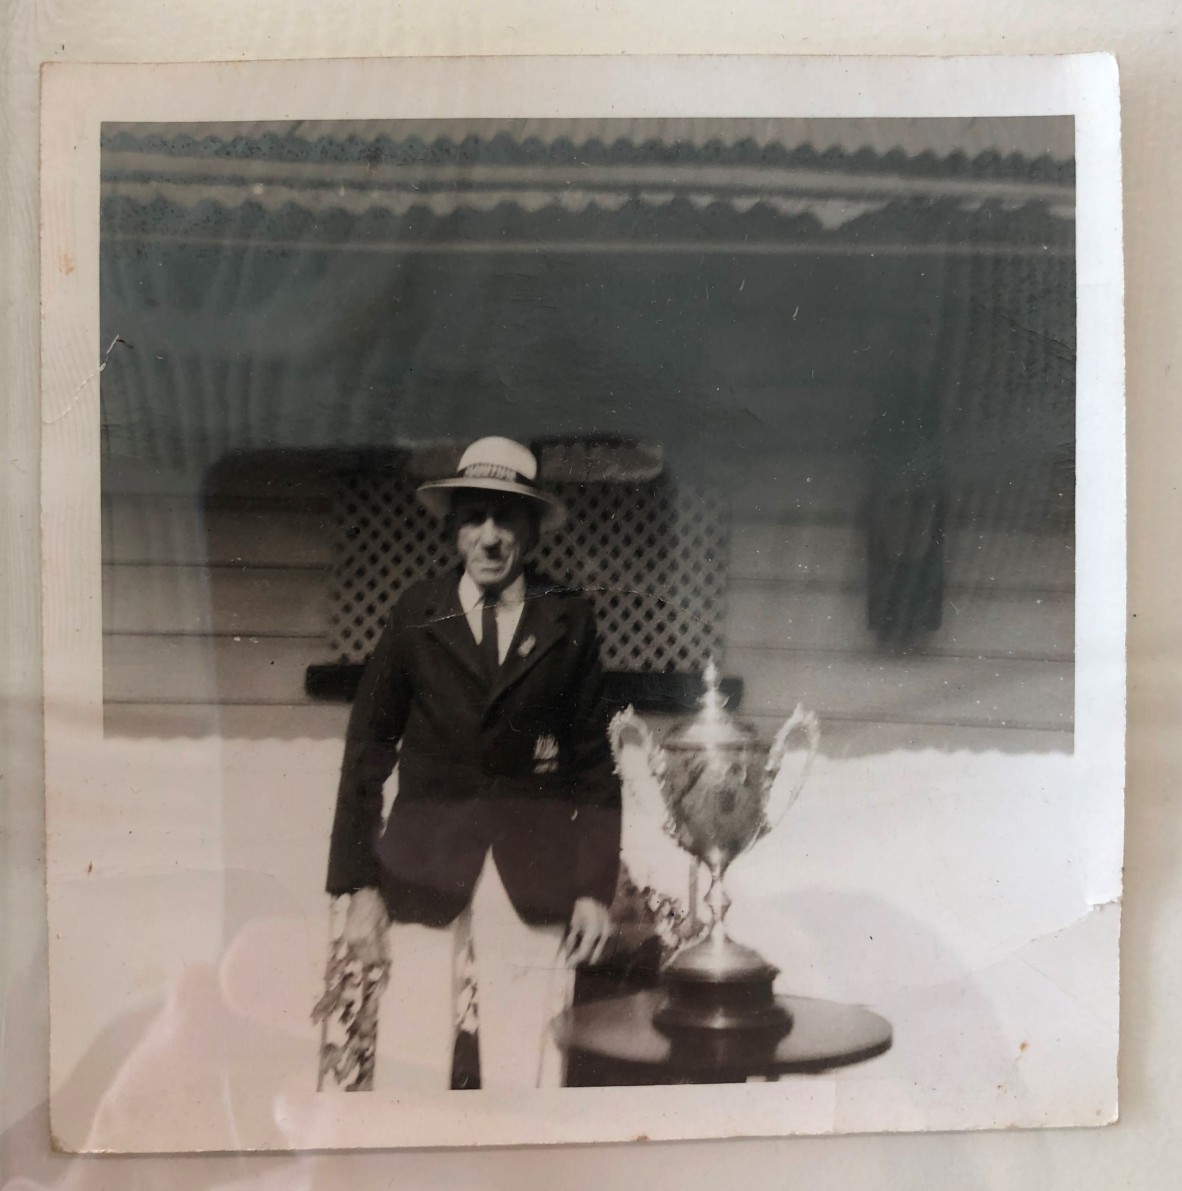 Photo of William Billy Baden Unwin with his trophy later in life Ca 1960s